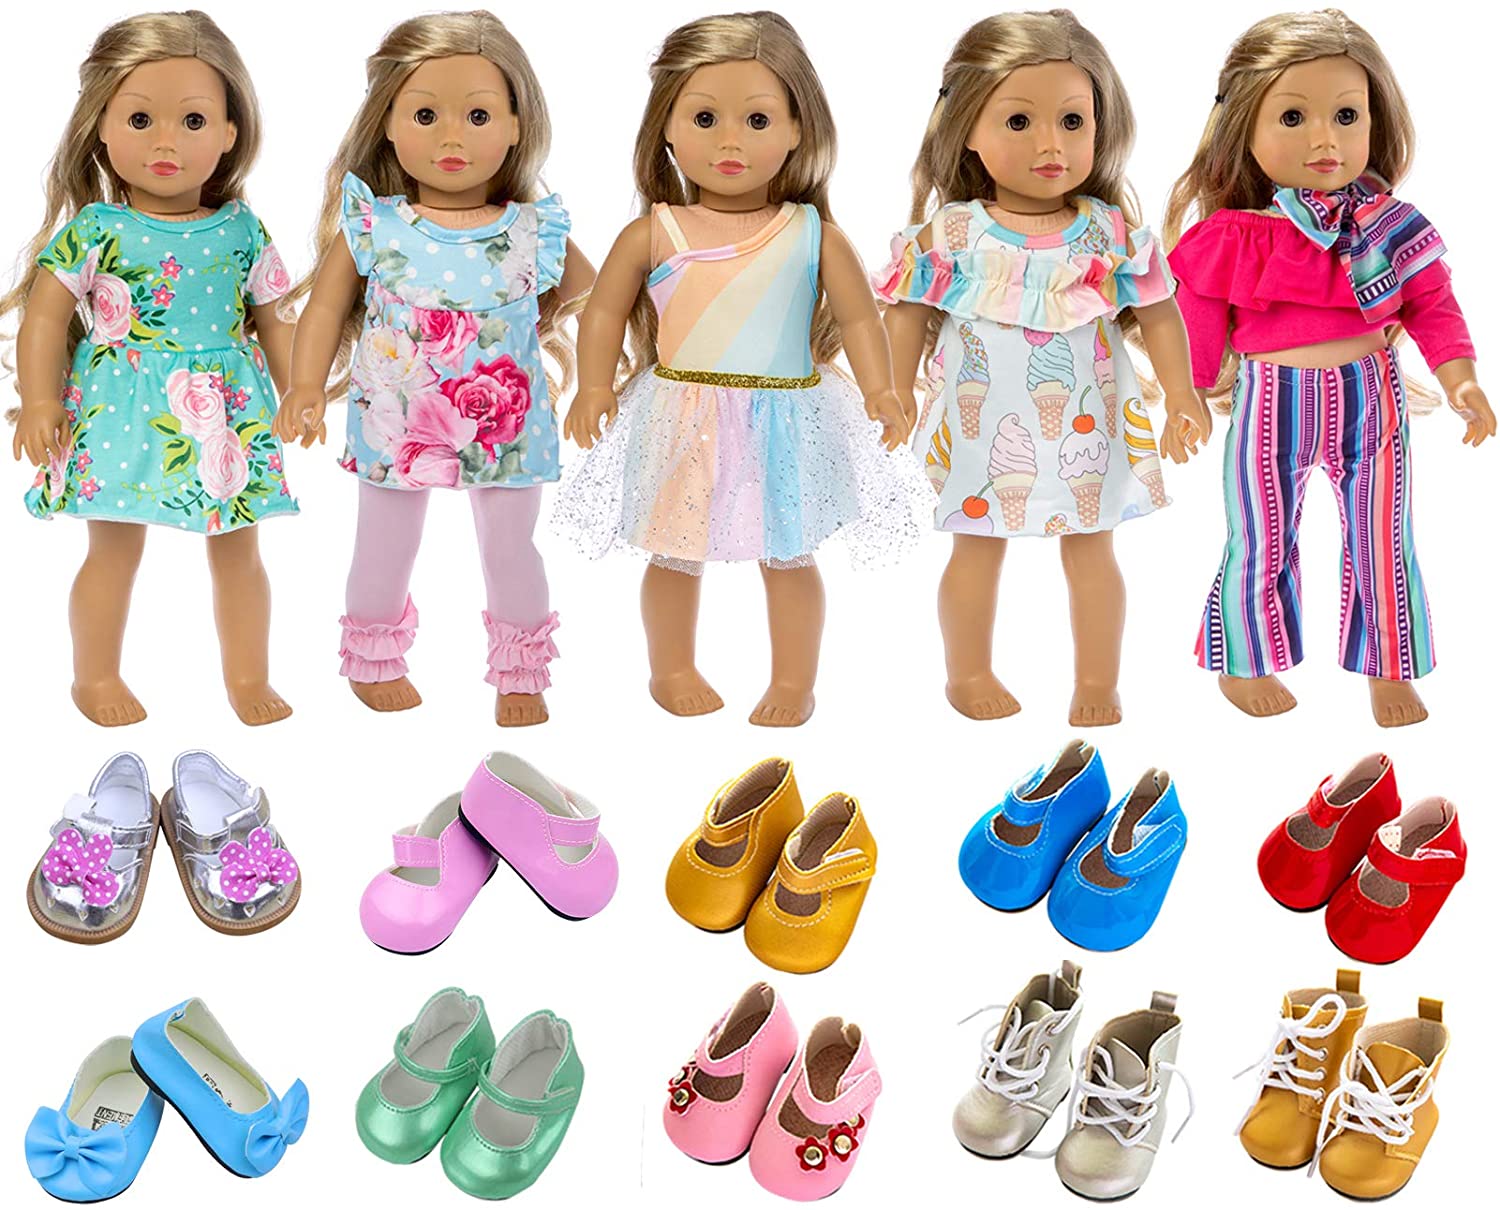 Cute Doll Clothes Underwear Pants Pajama Dress for 18 inch Girl Toy 